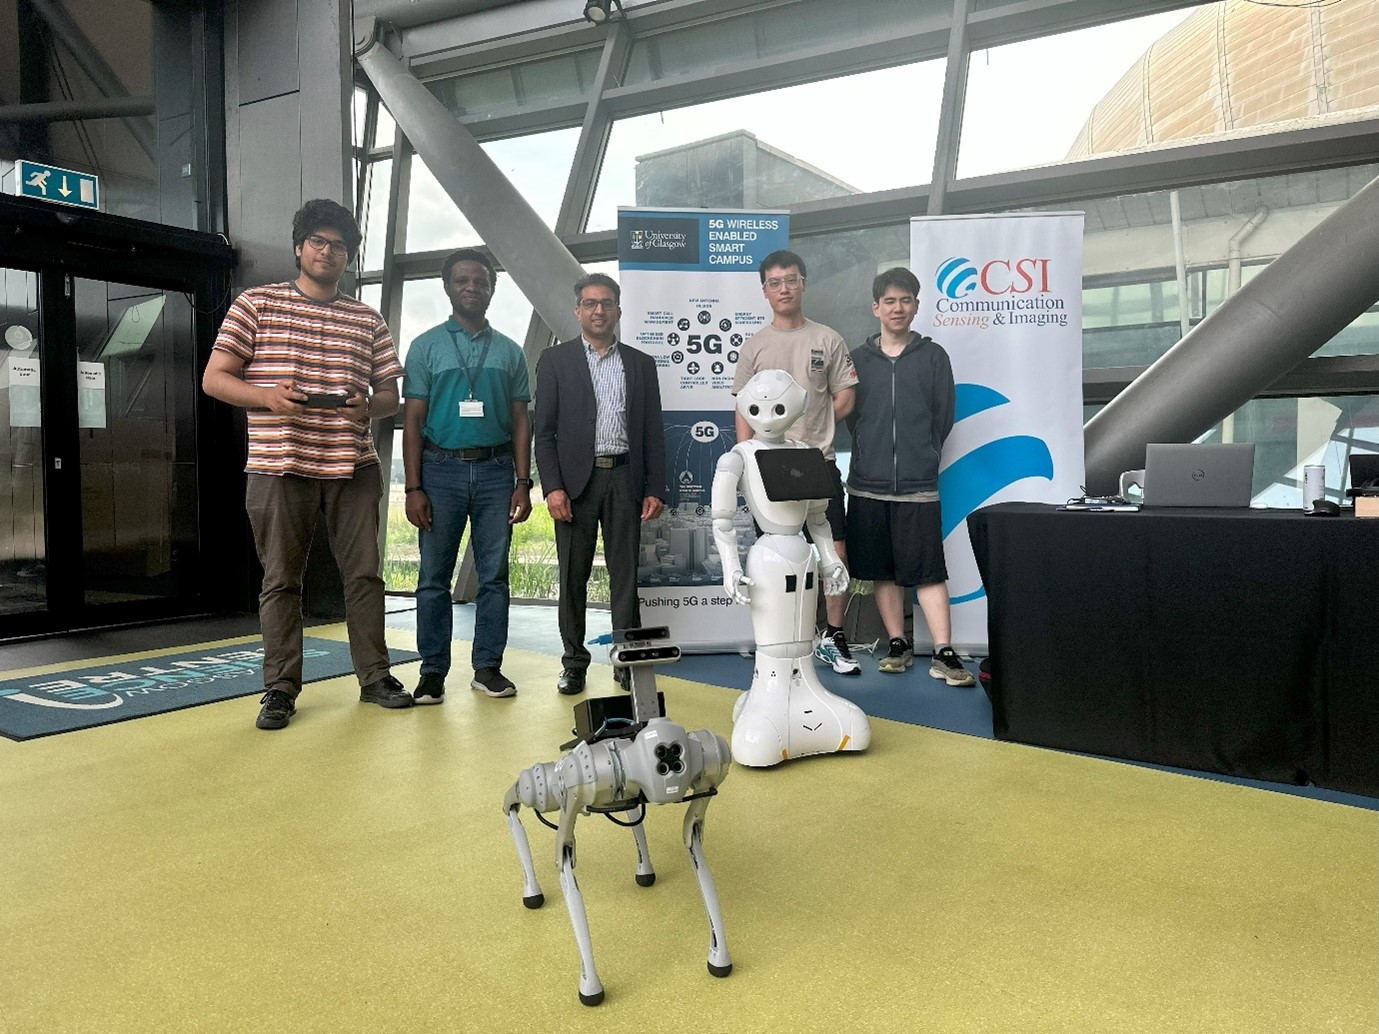 CSI group research team test Robbie the RoboDog at the SEC. The Social Robot also looking on.